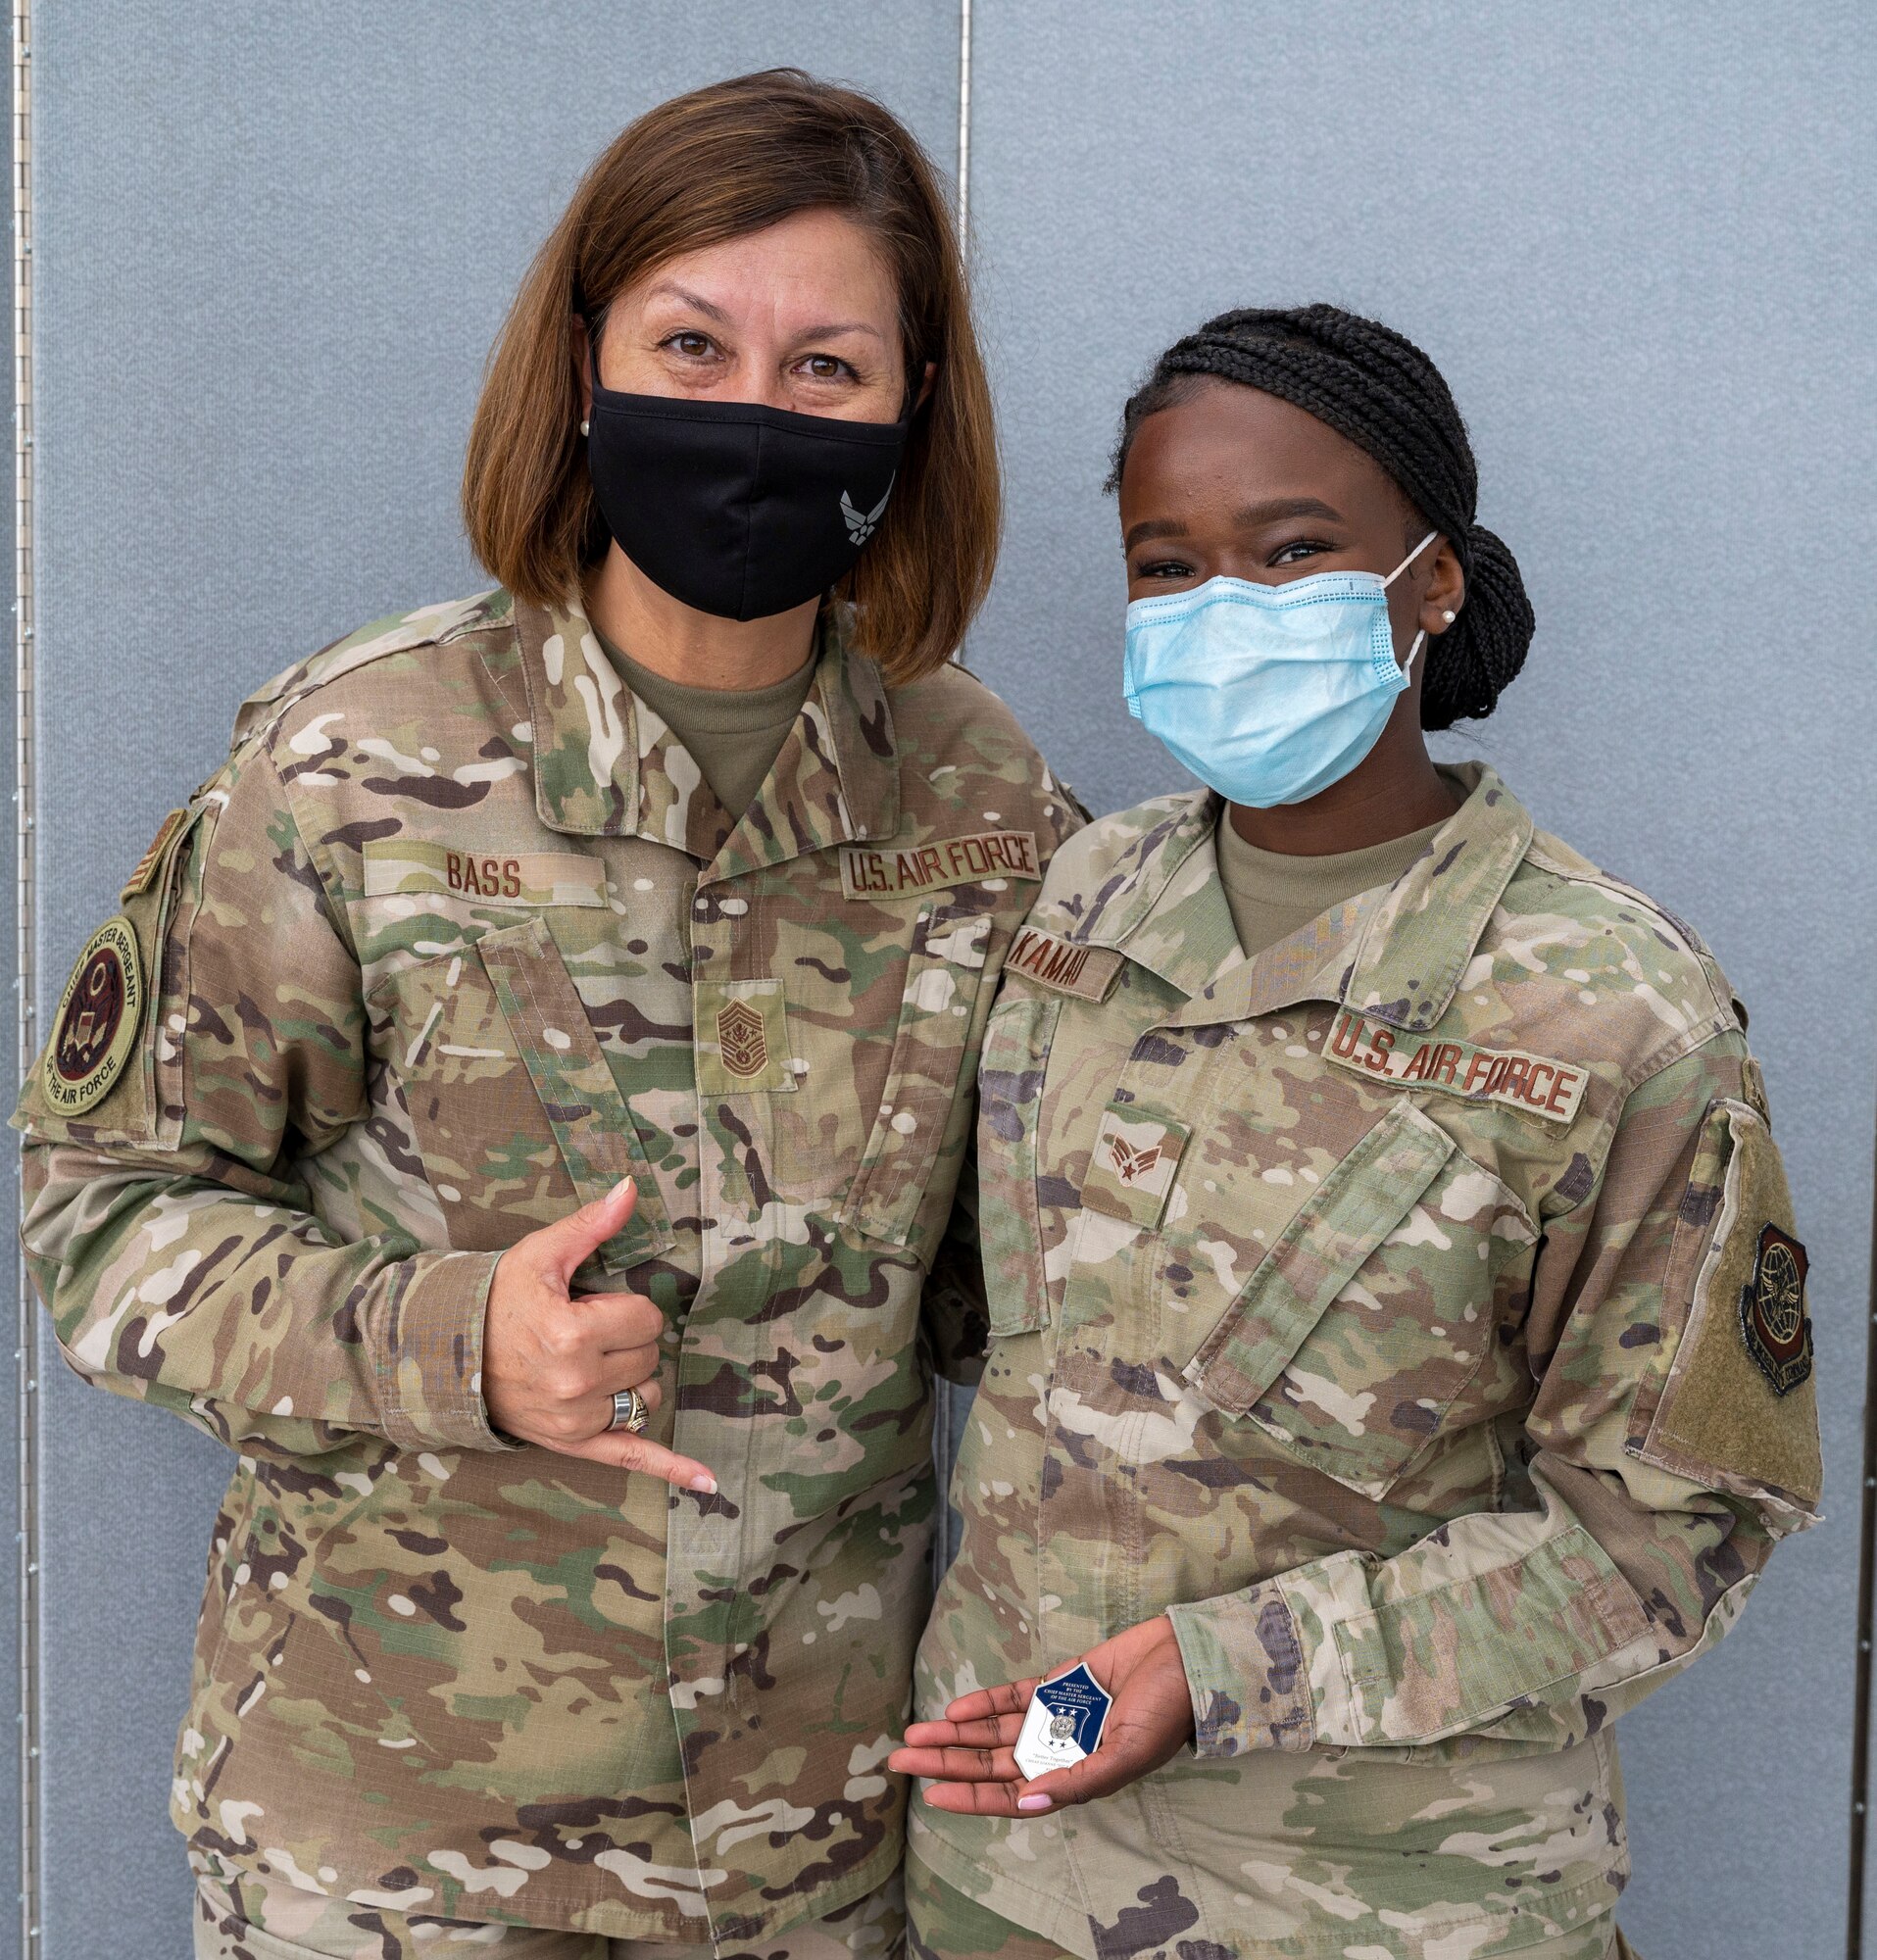 Chief Master Sgt. of the Air Force JoAnne S. Bass coins Senior Airman Annette Kamau, 87th Health Care Operations Squadron medical technician, at the Patriot Express COVID-19 testing facility in the Baltimore/Washington International Thurgood Marshall Airport in Baltimore, July 8, 2021. Since November 2020, the operation ensured U.S. Transportation Command’s fulfillment of national security requirements while providing for the health and safety of service members and their families. Due to the increased availability in COVID-19 testing centers and vaccines, testing at the BWI facility is scheduled to discontinue July 15, 2021. (U.S. Air Force photo by Airman 1st Class Cydney Lee)